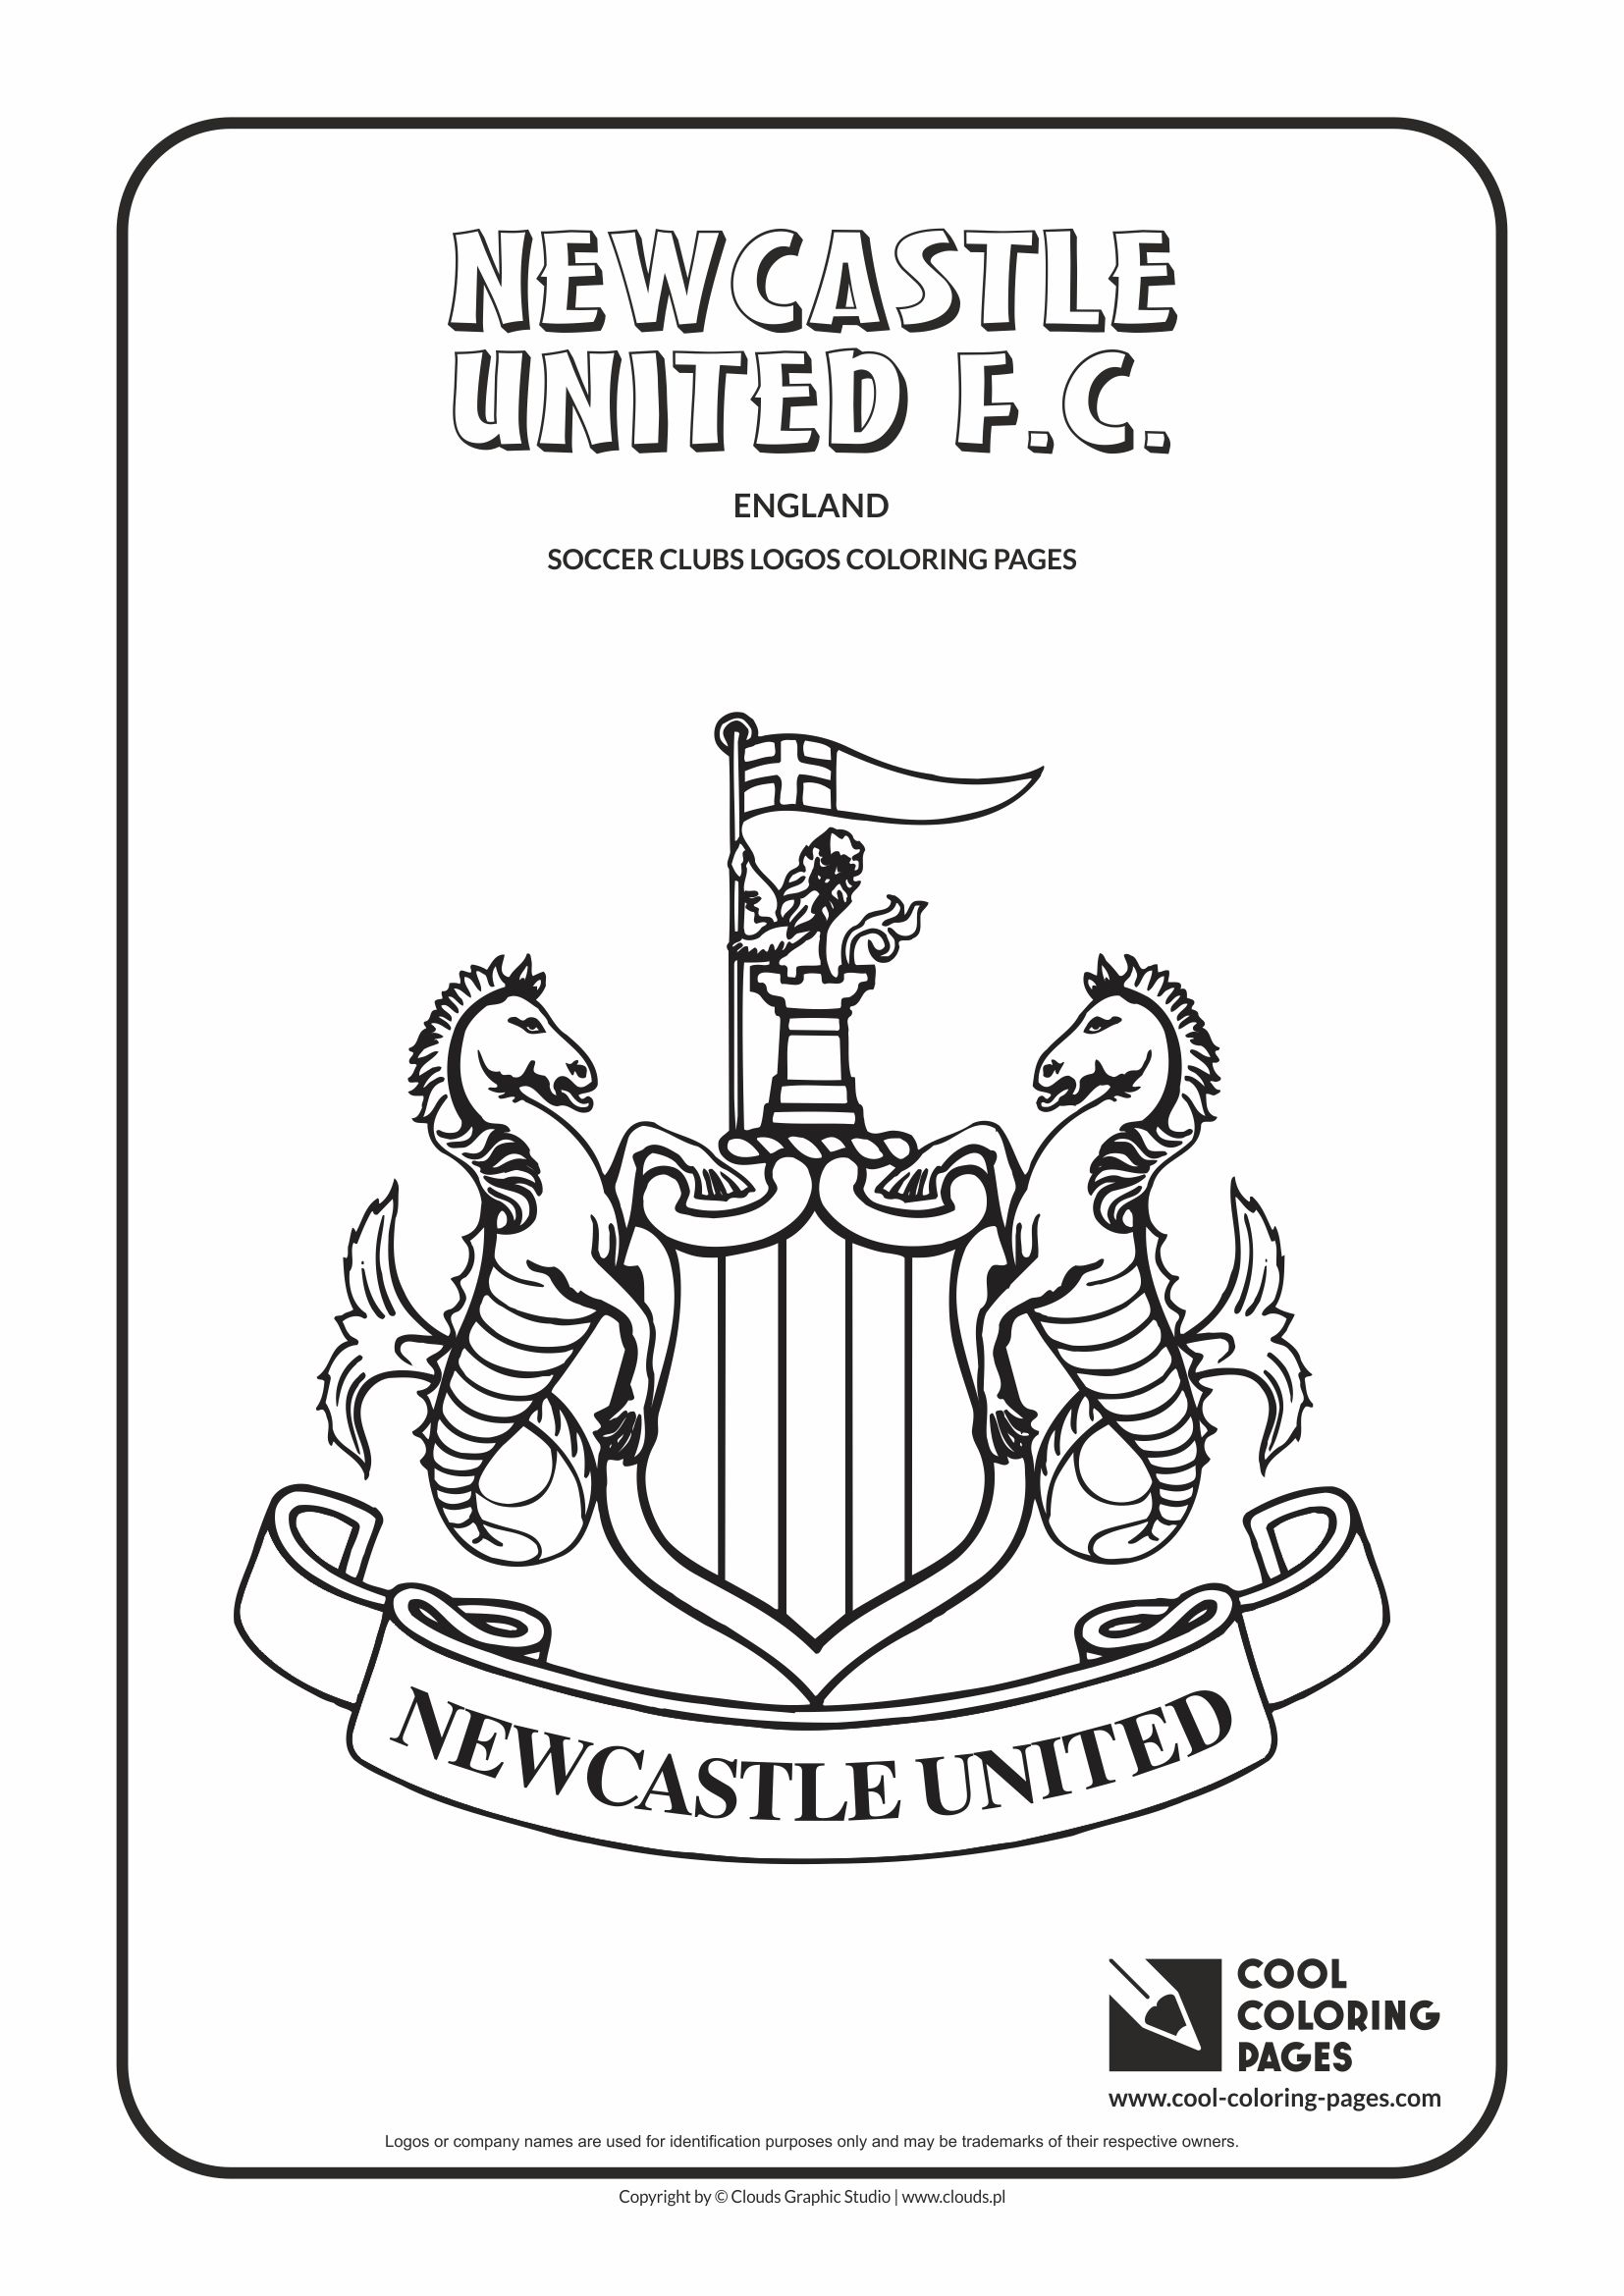 Cool Coloring Pages Newcastle United F.C. logo coloring page - Cool